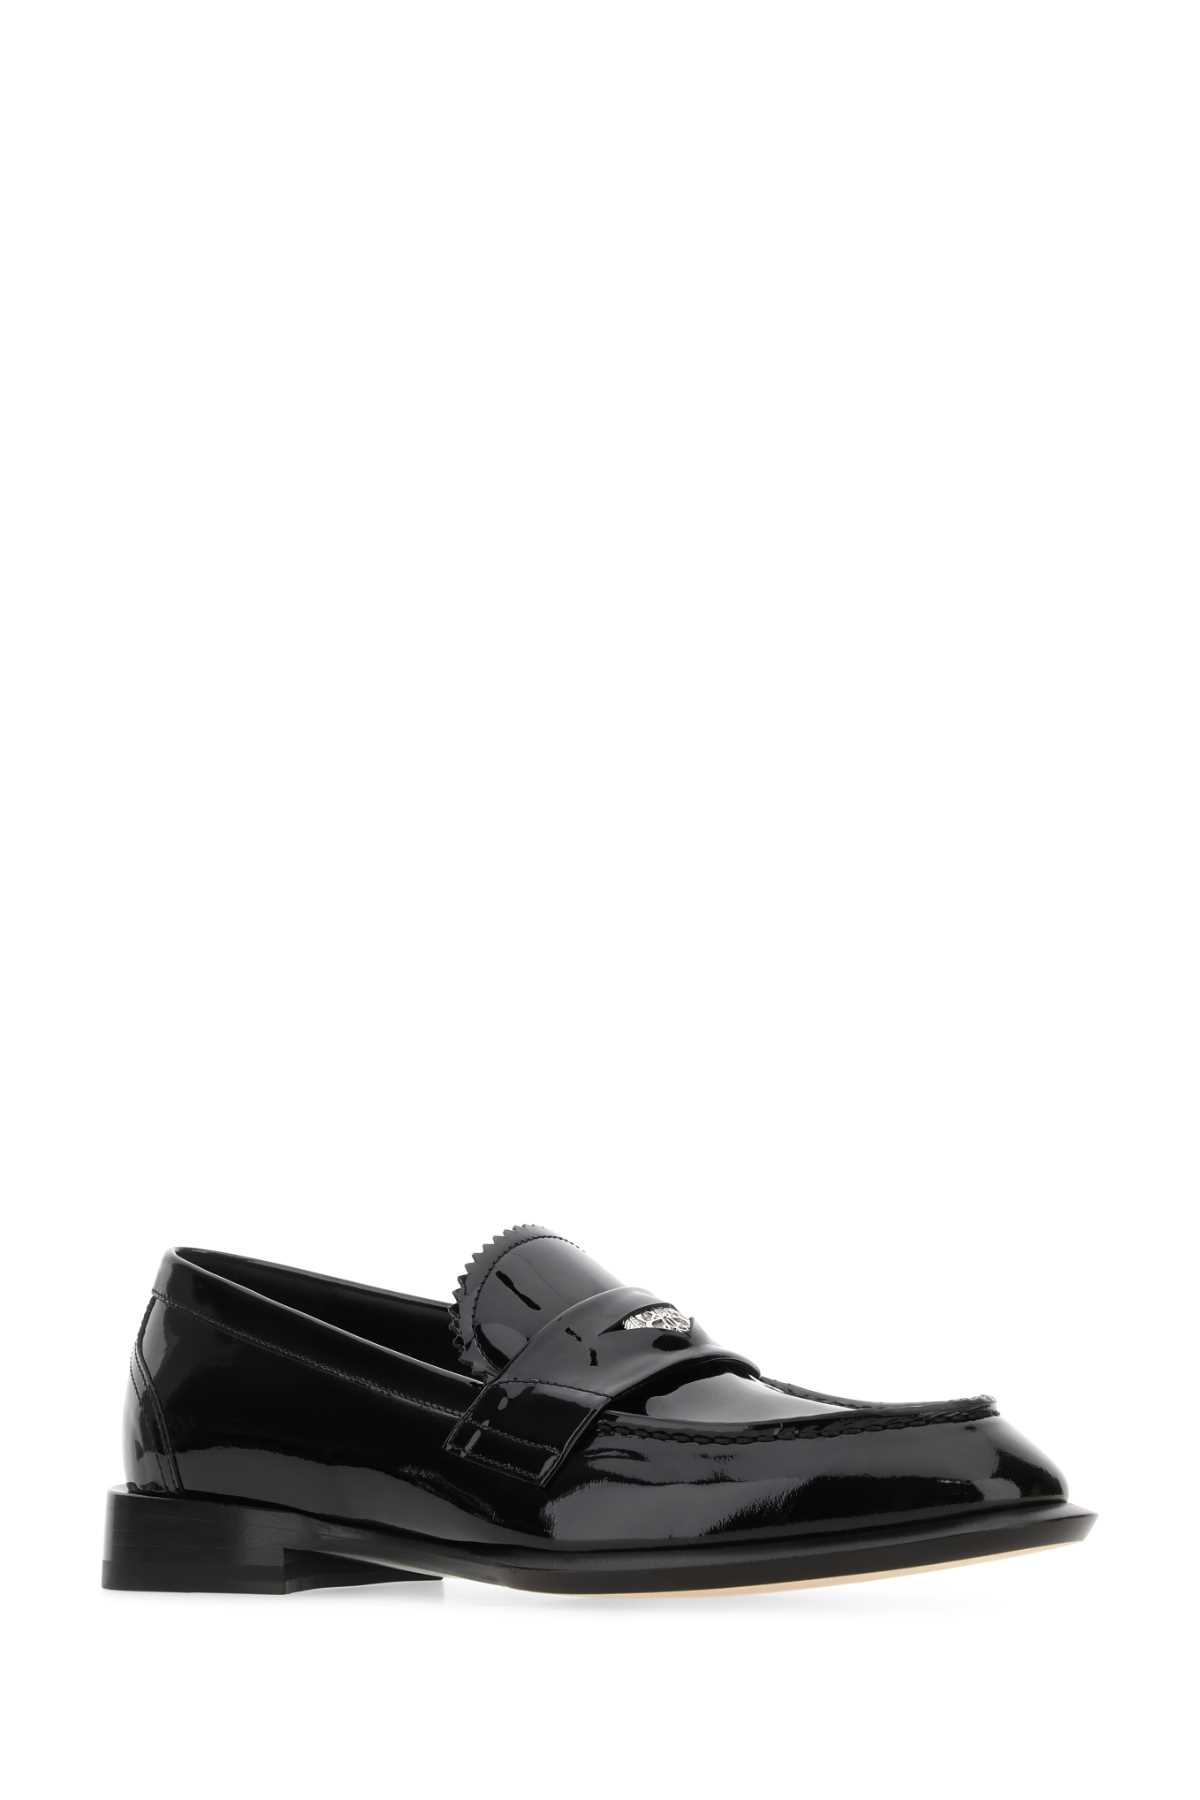 ALEXANDER MCQUEEN BLACK LEATHER LOAFERS